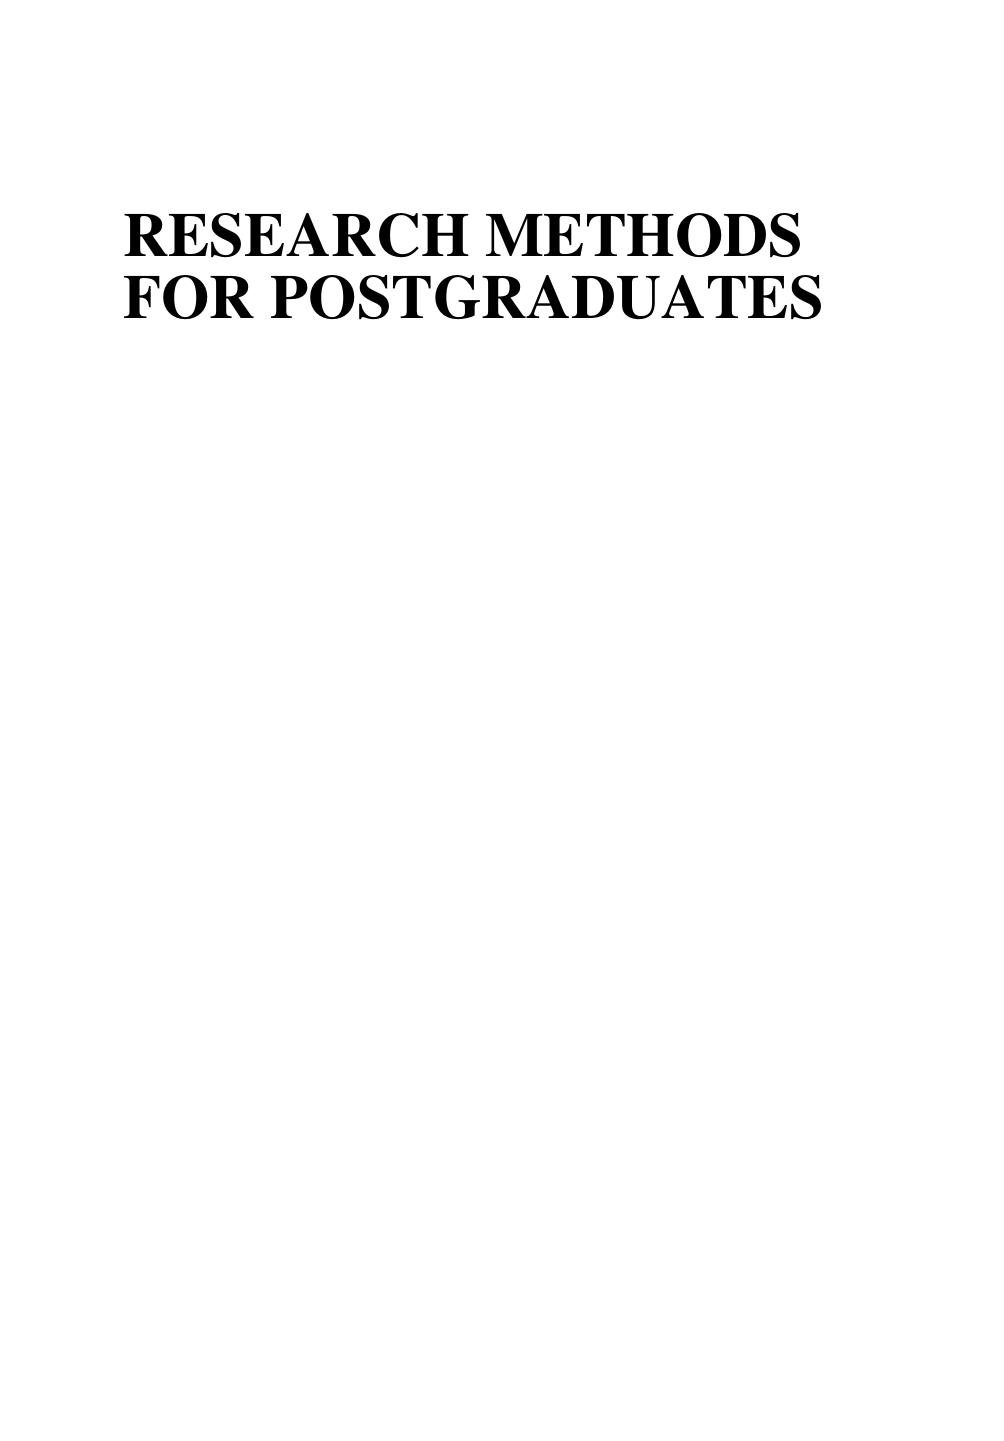 Research Methods for Postgraduates by Tony Greenfield, Sue Greener (z-lib.org)